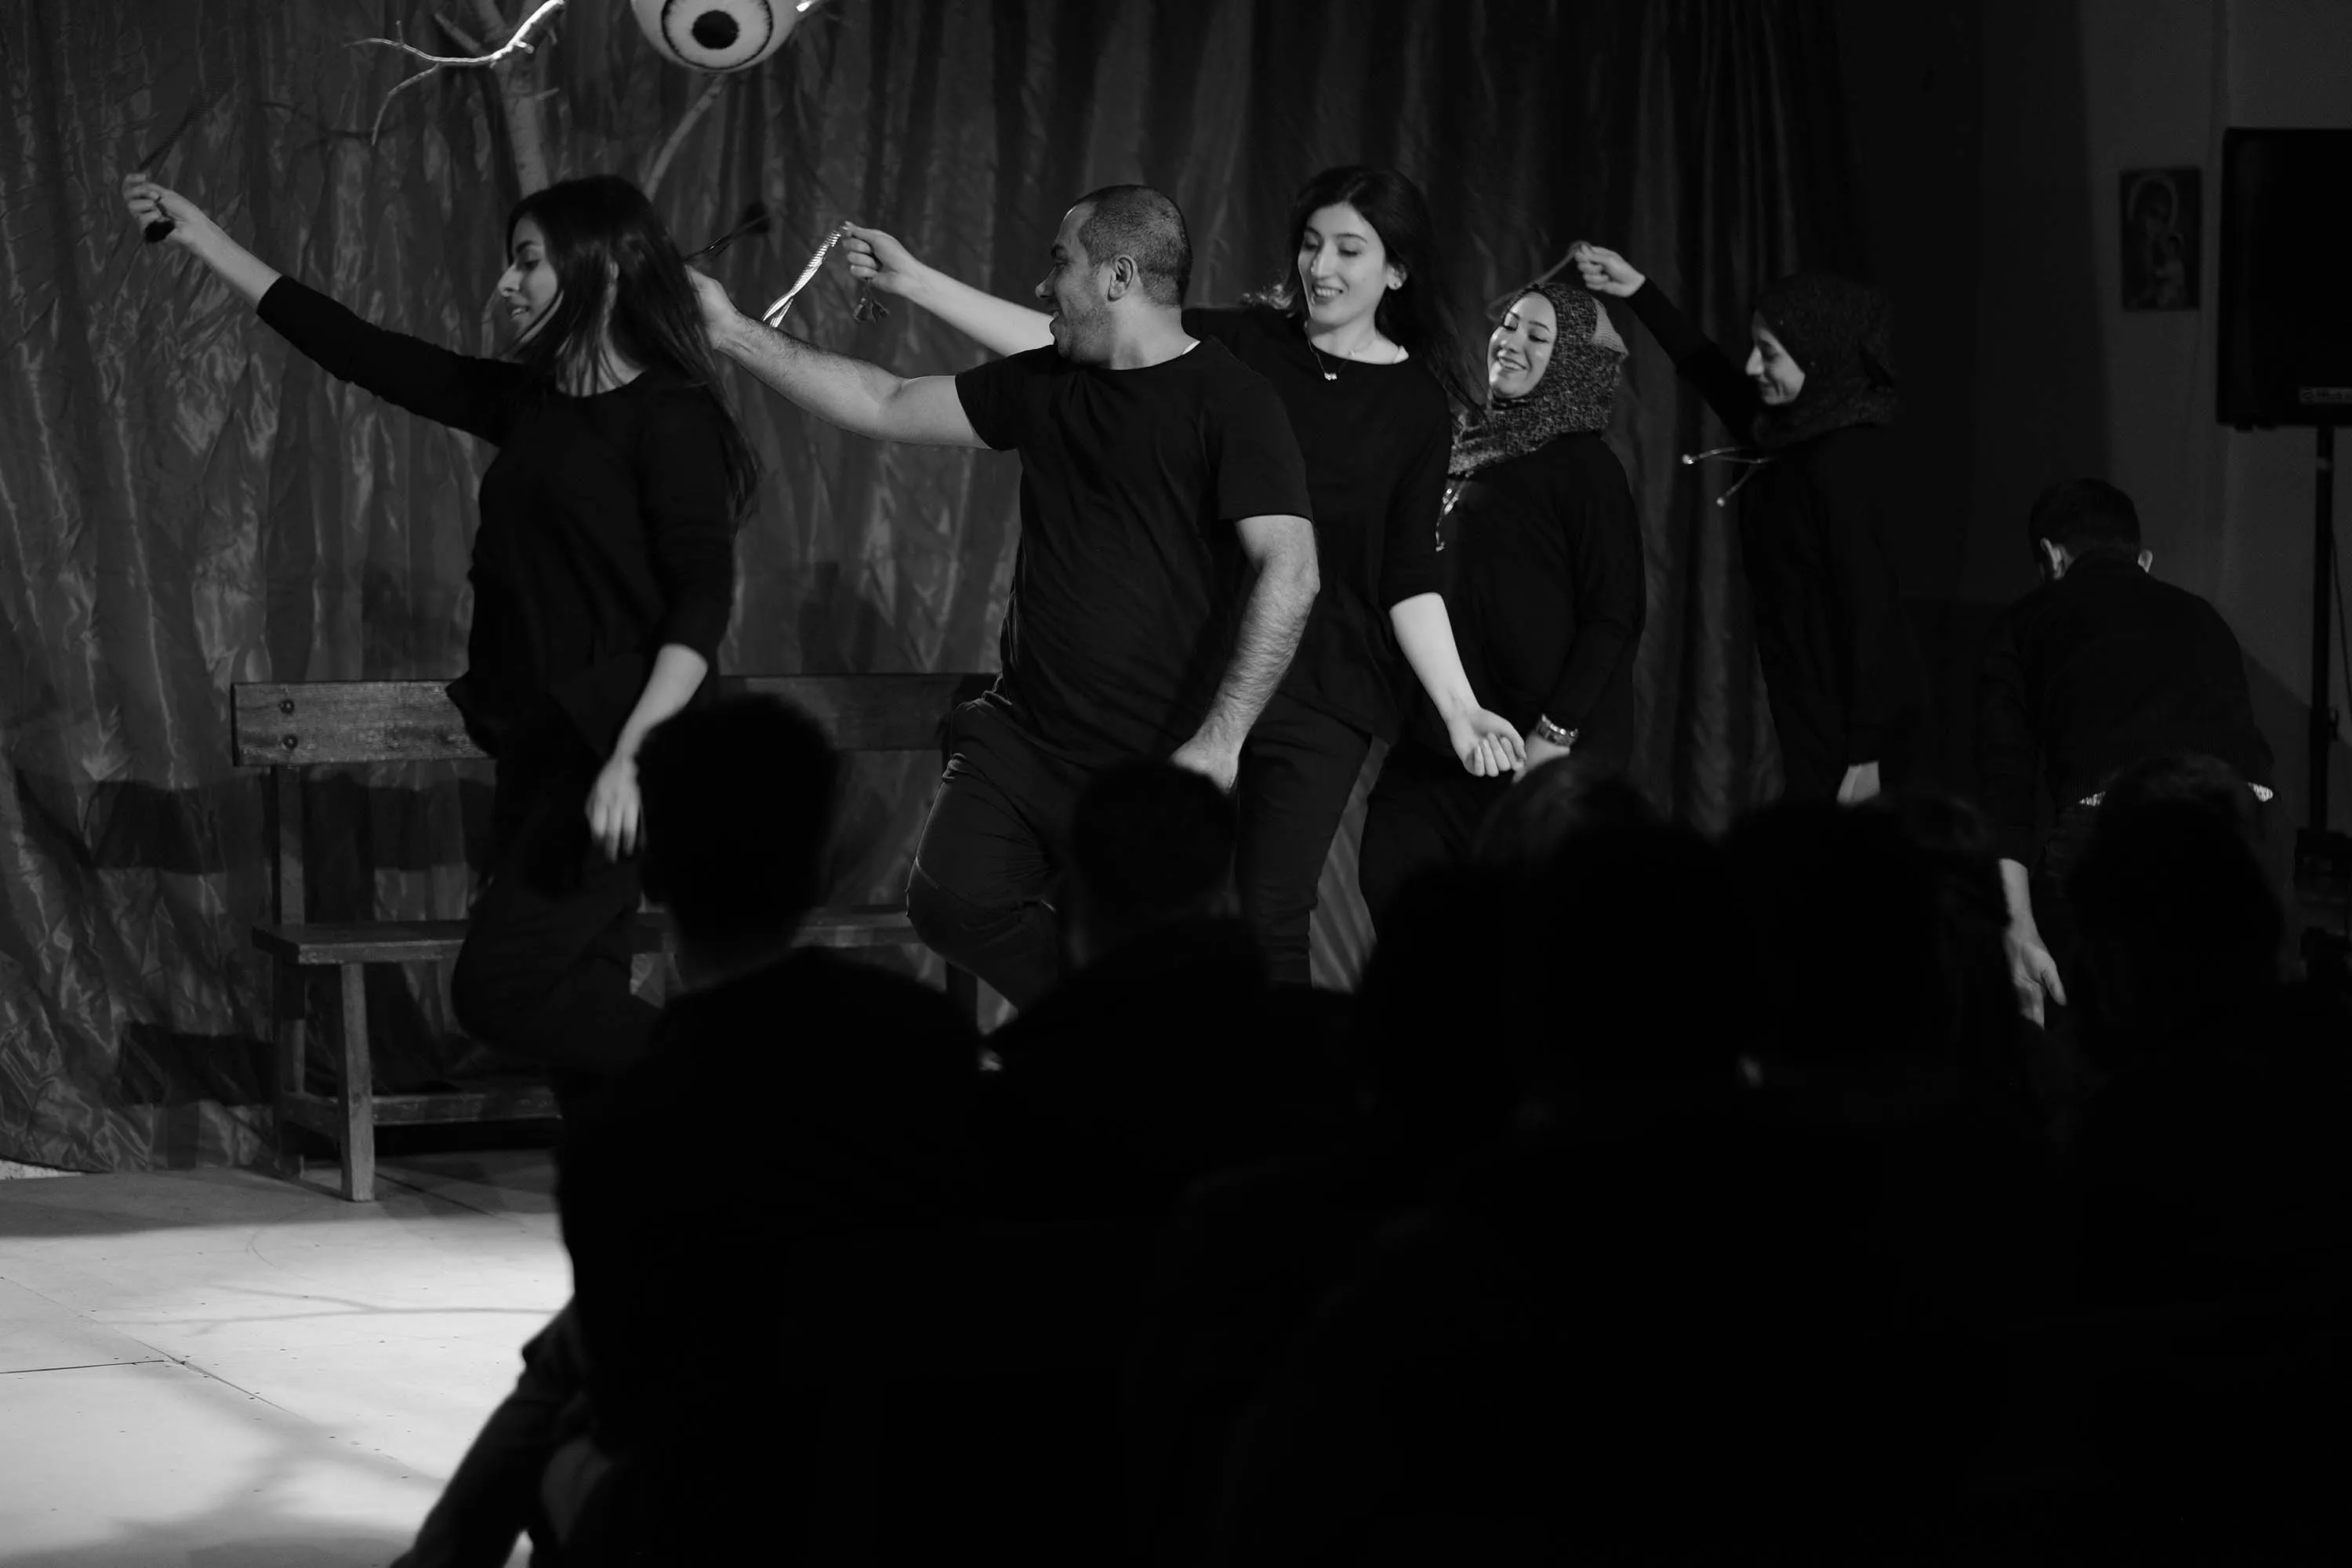  A series of black-and-whie images showing actors on a stage while moving around, holding hands and bowing in a line, standing in two lines across from each other holding ropes and in a single line dancing.